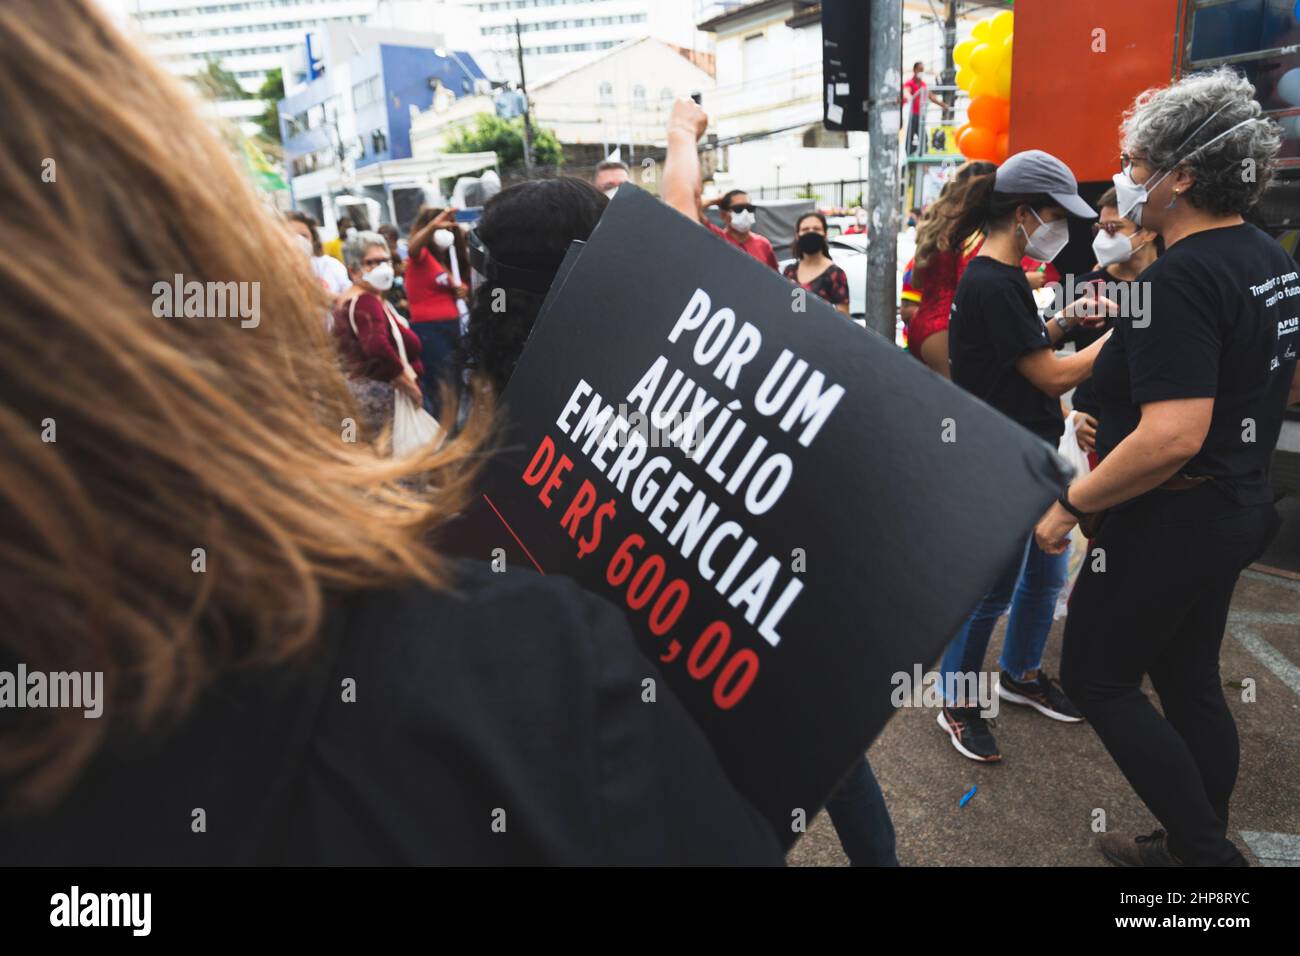 People protest against the government of President Jair Bolsonaro in the city of Salvador. They use banners, Stock Photo